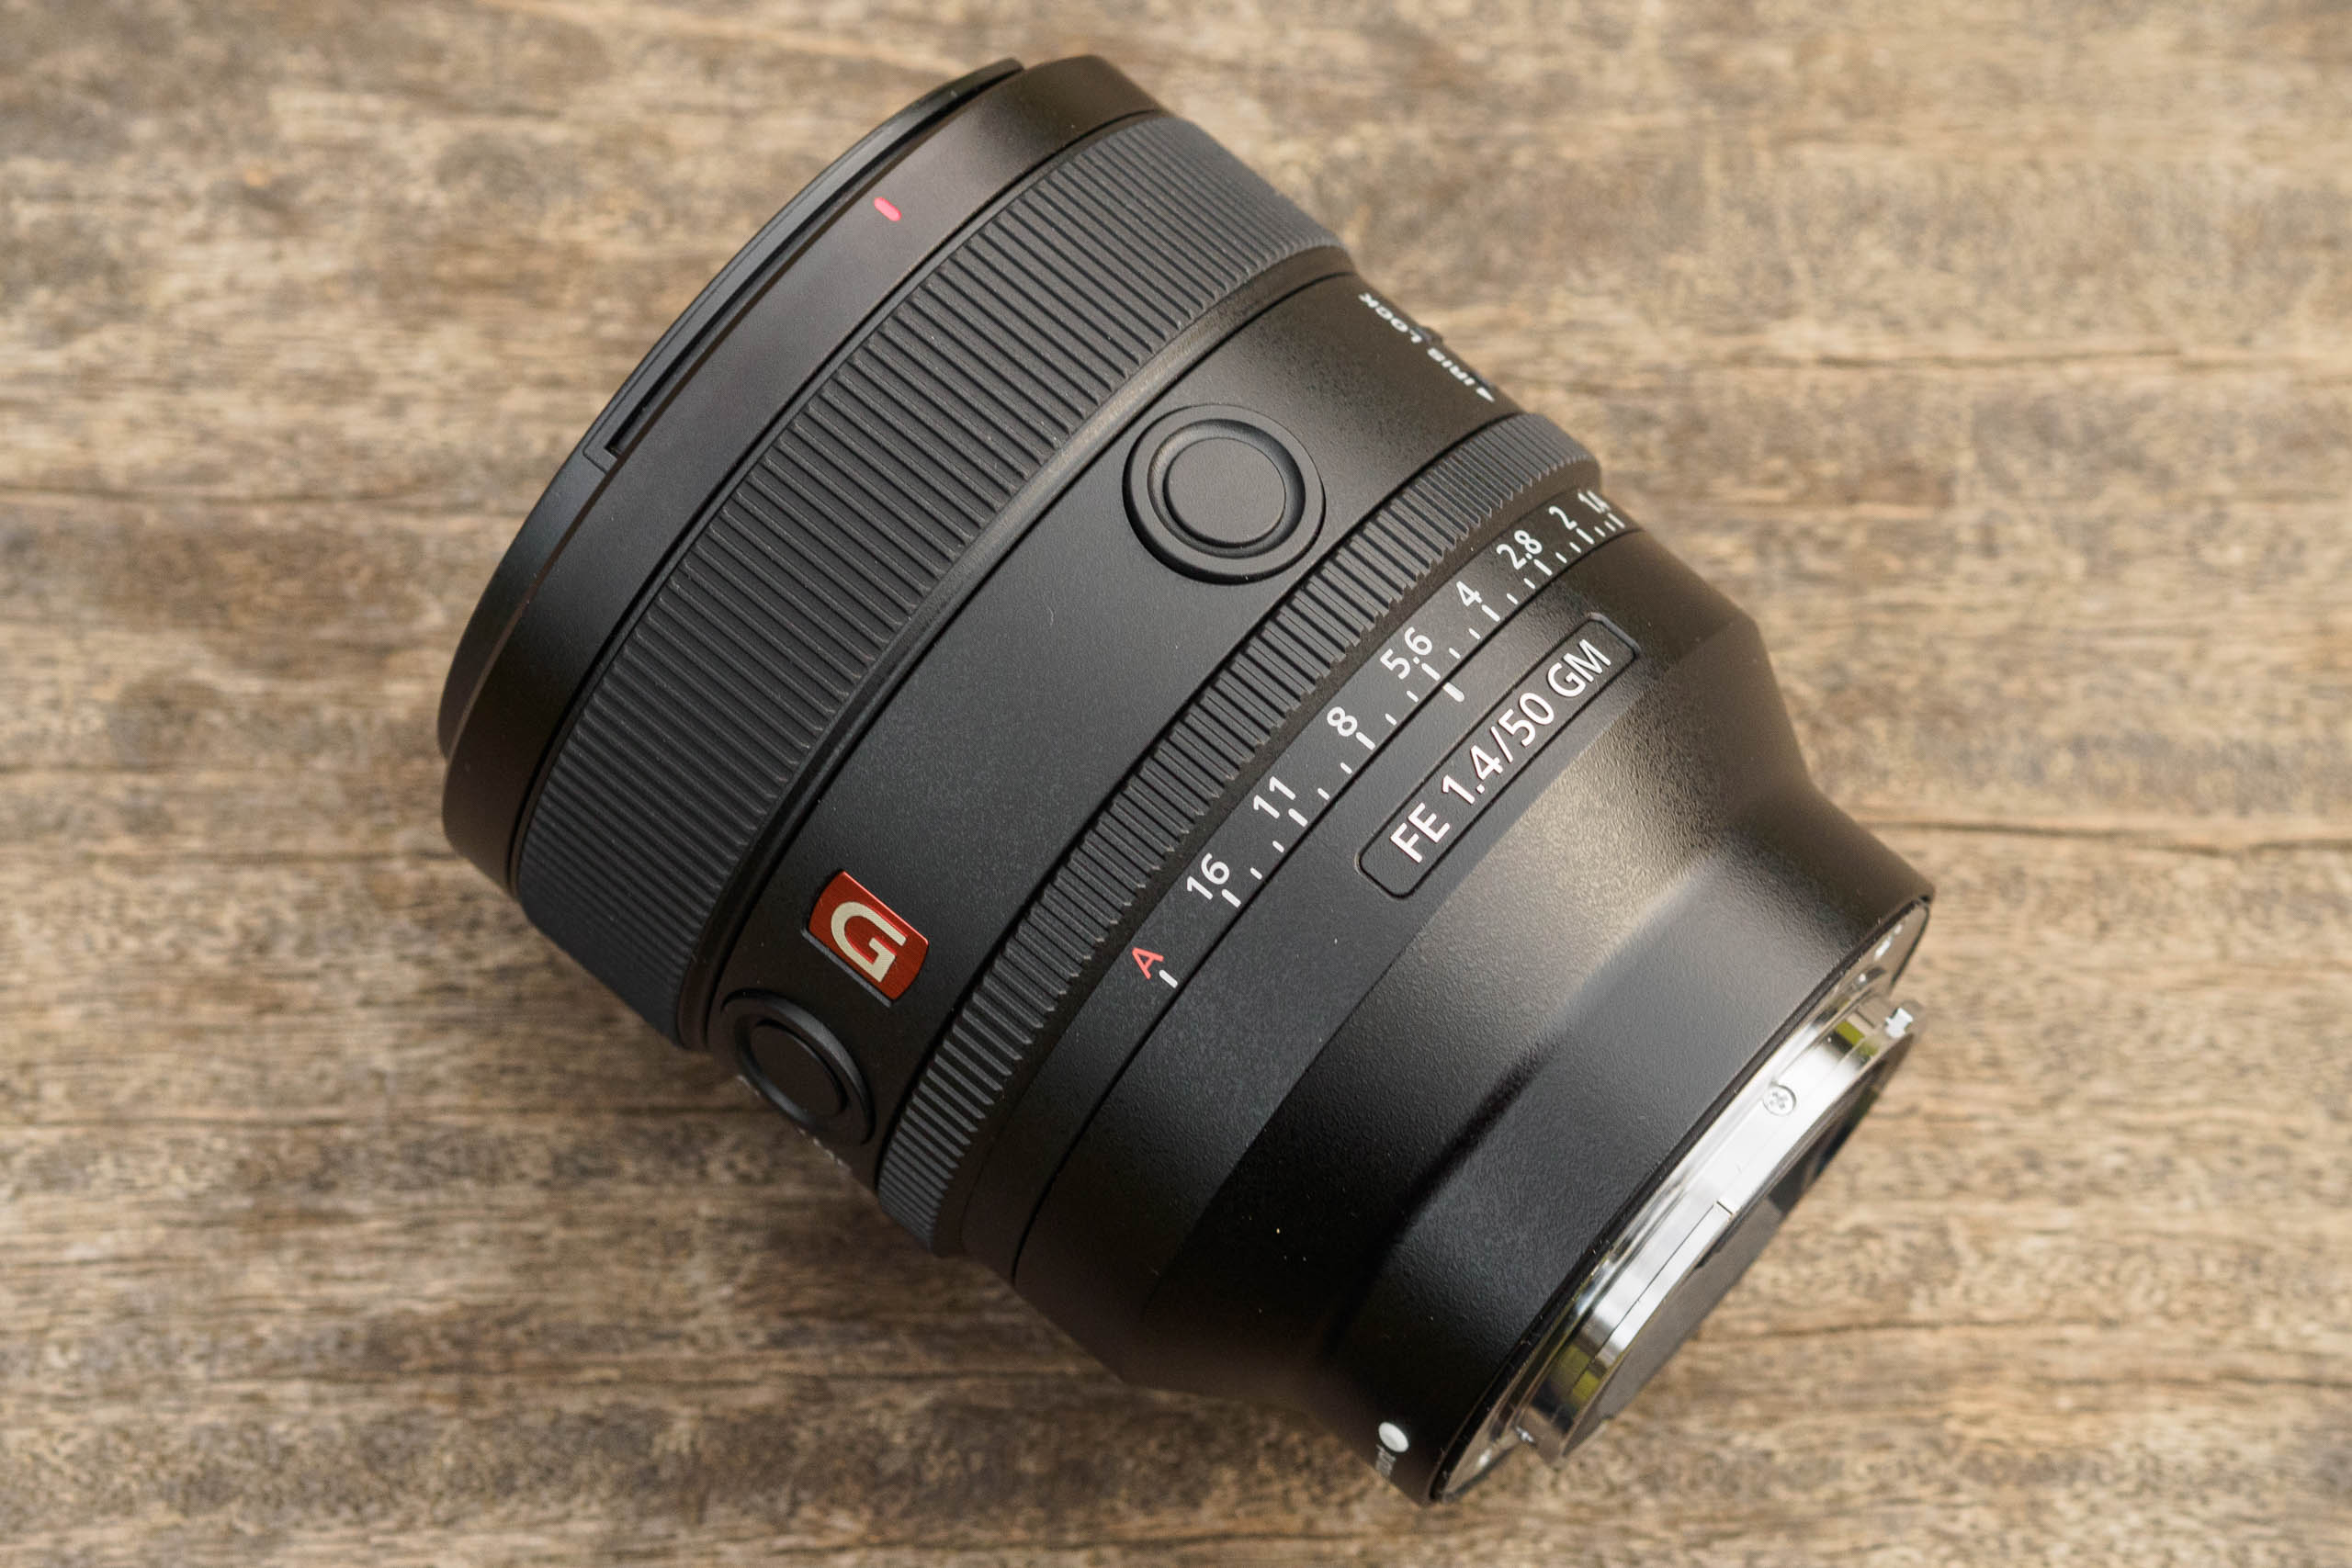 Sony FE 50 mm f/1.4 GM review - Build quality 